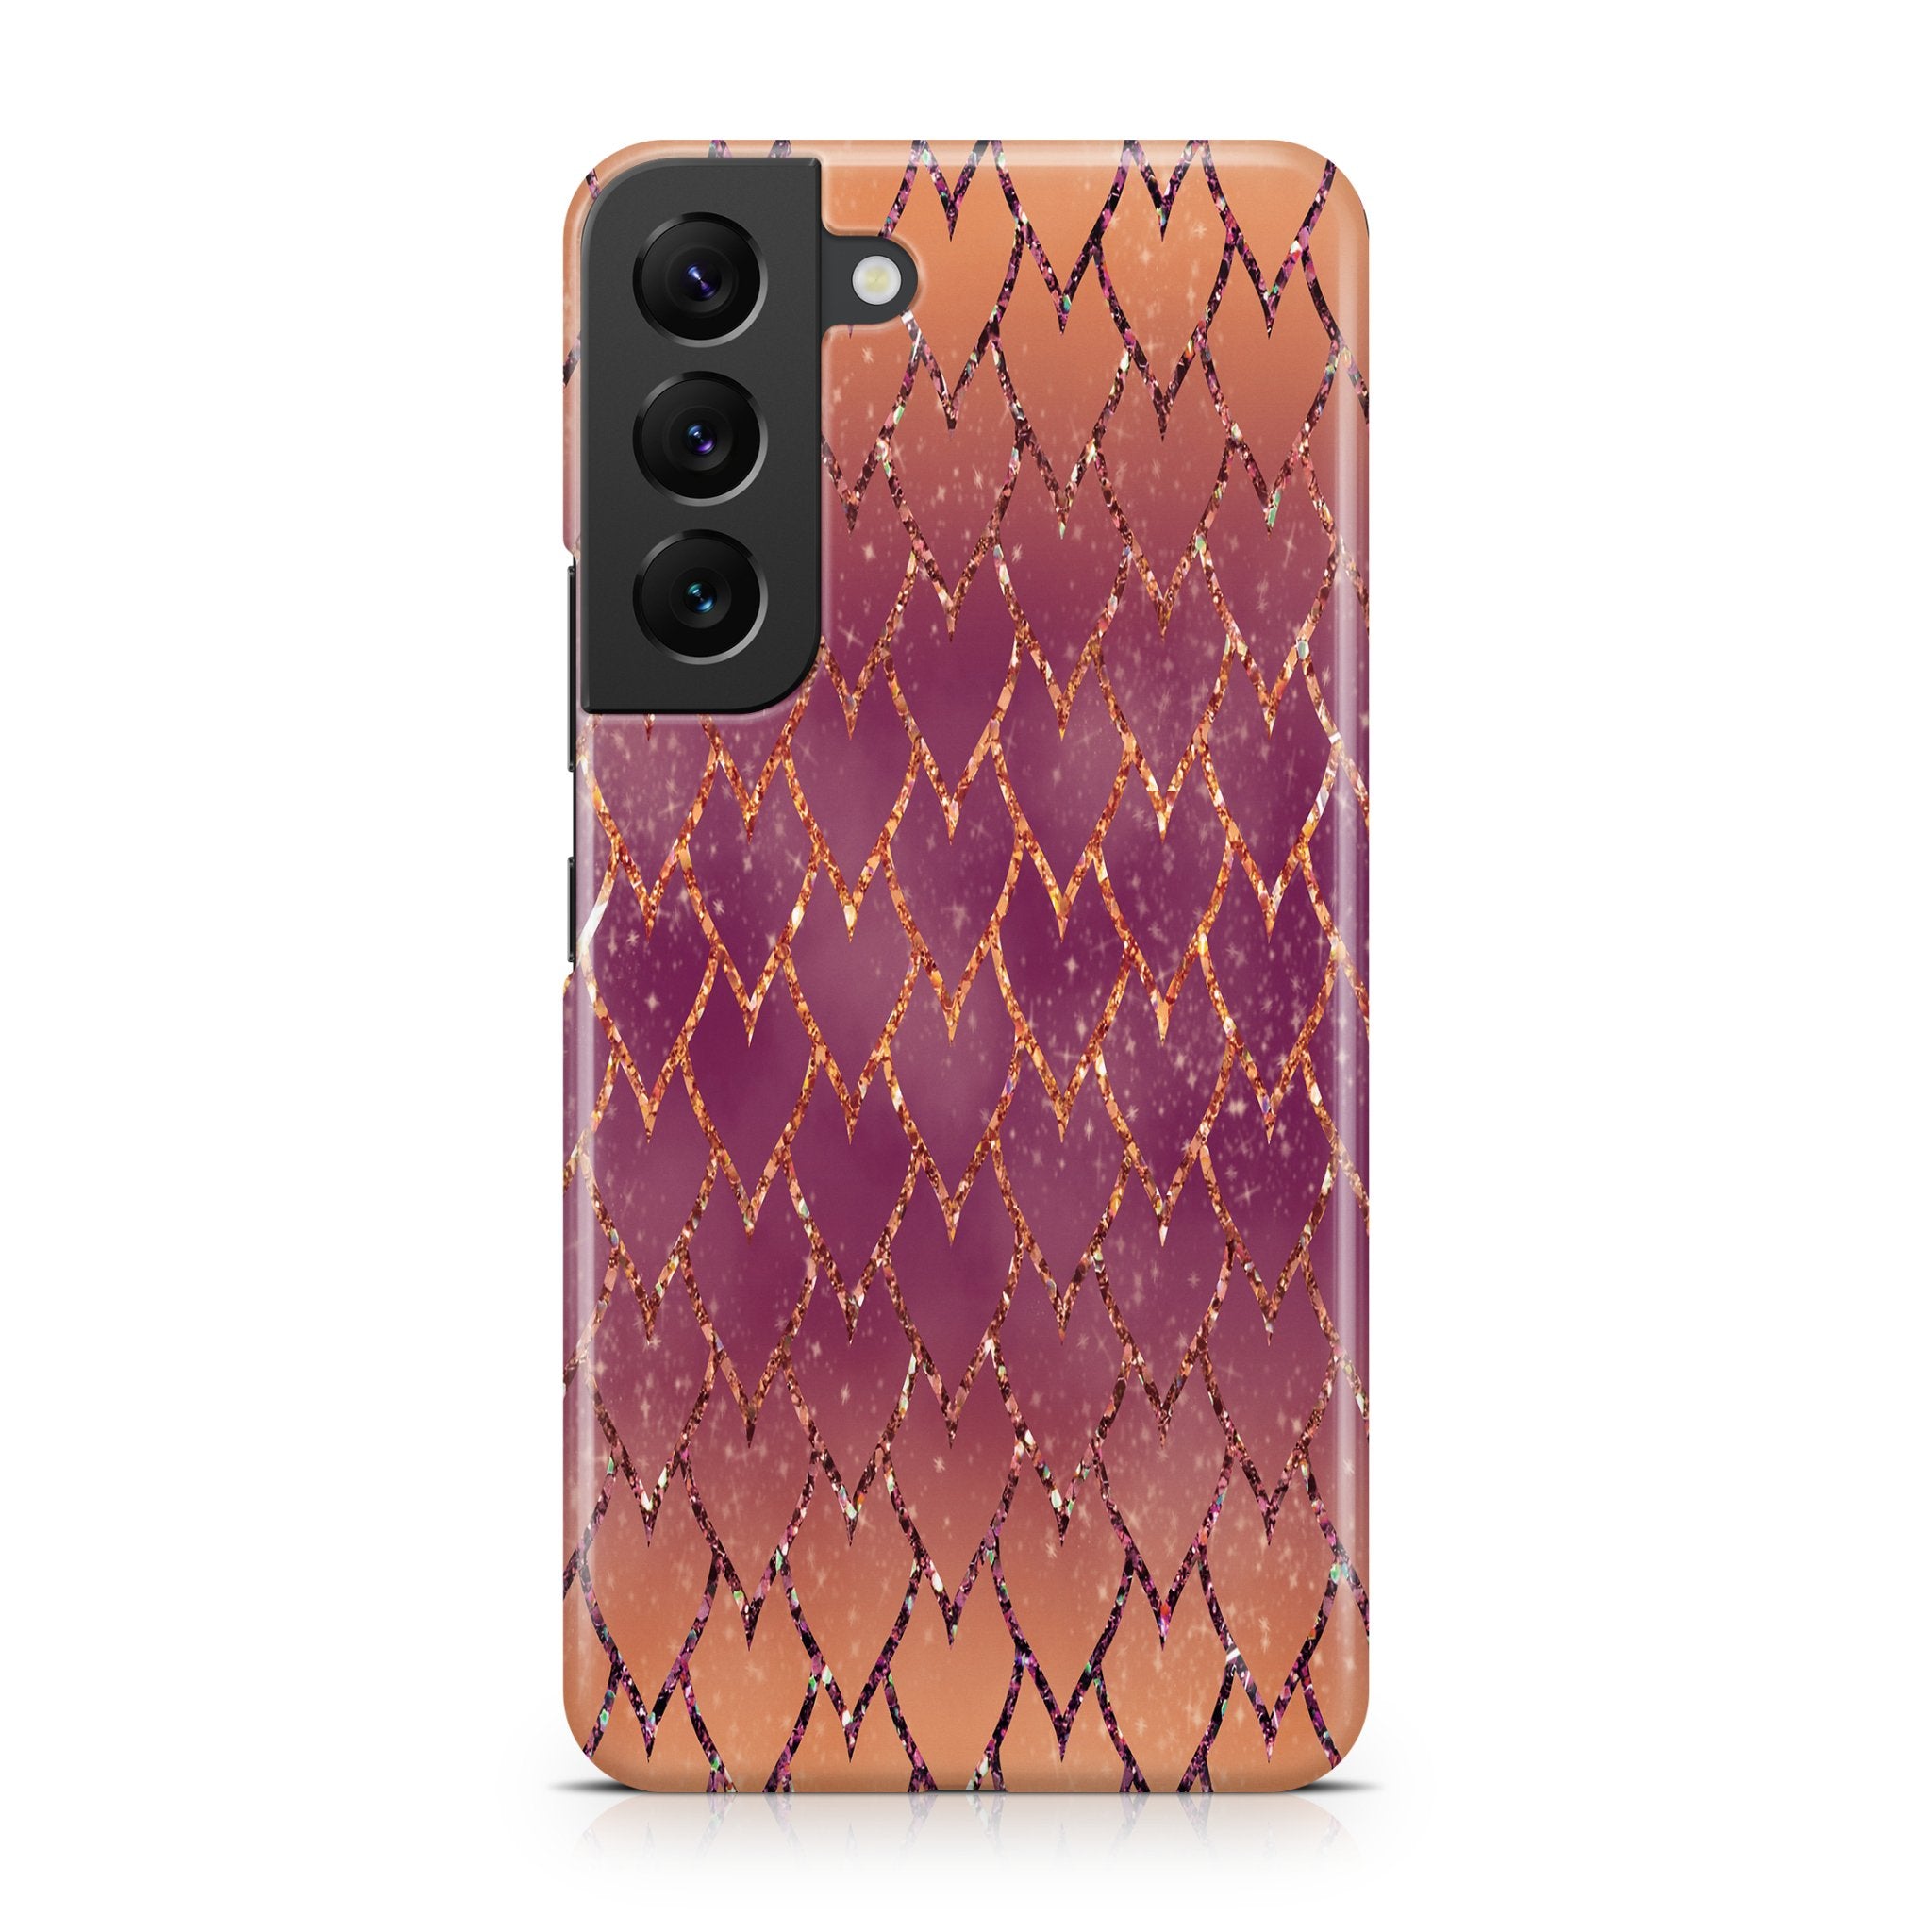 Pumpkin Spice Dragonscale - Samsung phone case designs by CaseSwagger